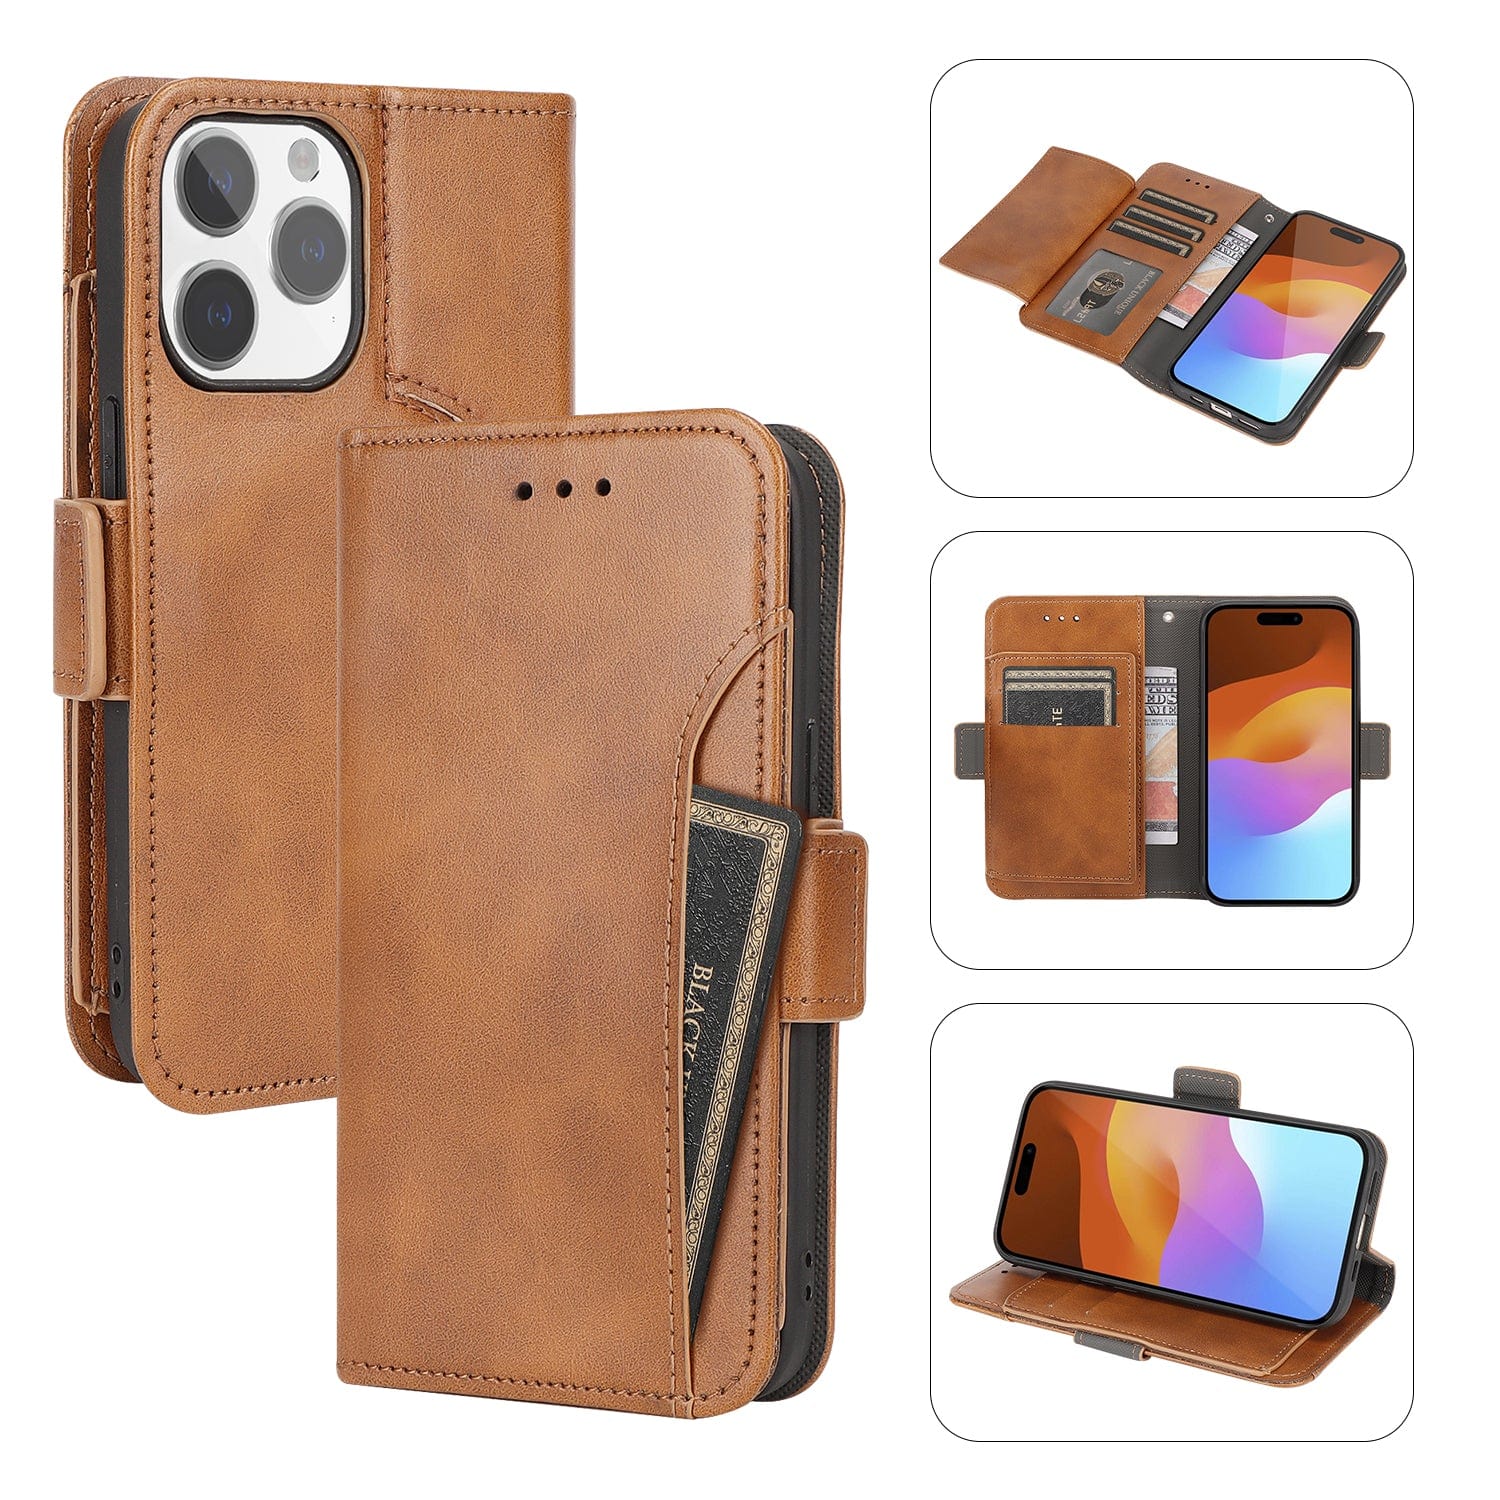 Protection Kit Bundle - Genuine Leather Wallet Case with Tempered Glass Screen and Camera Protector for iPhone 15 Pro Max - Brownk